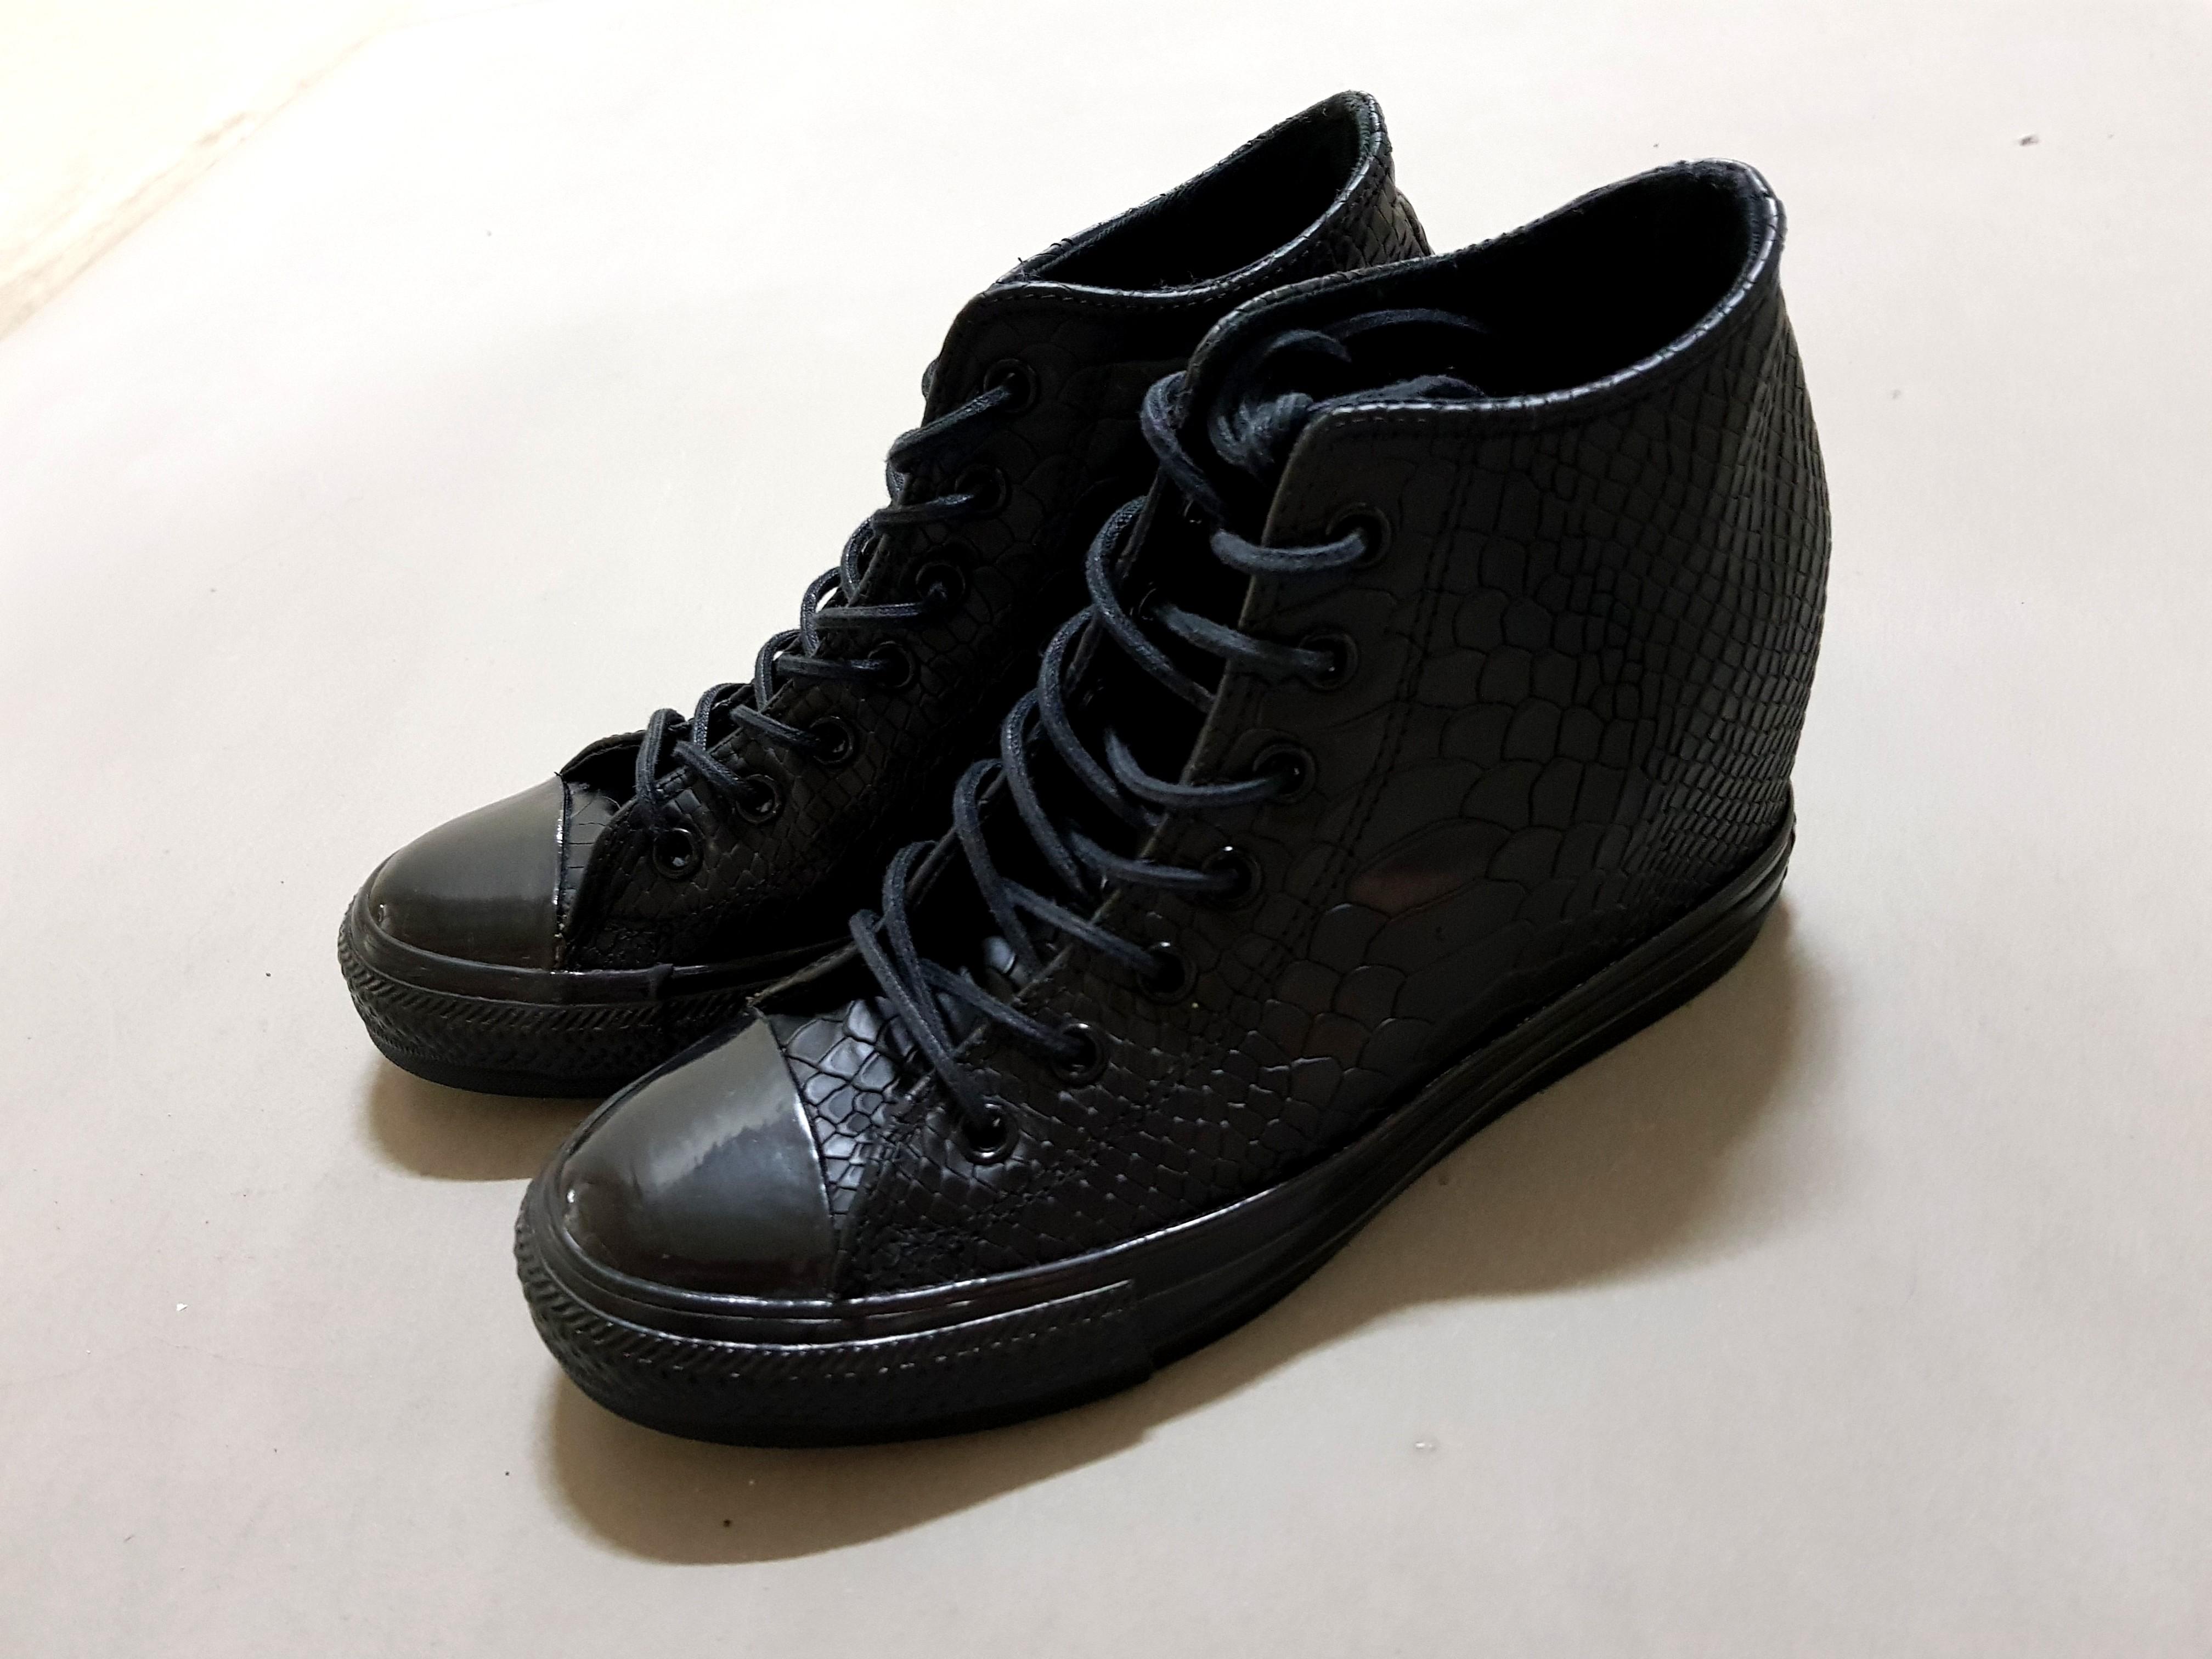 converse all star black reptile embossed high top wedge trainers